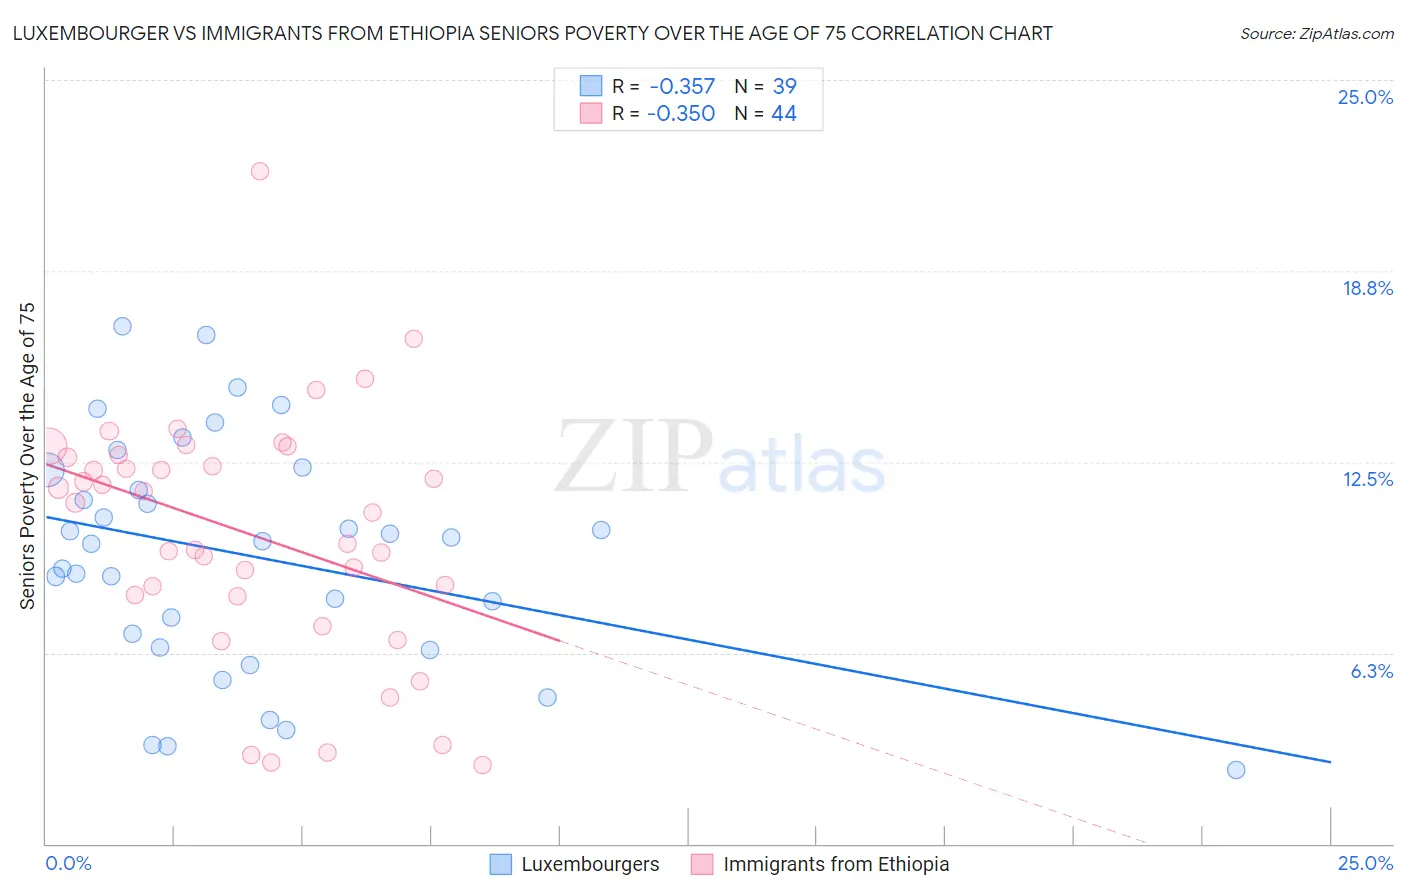 Luxembourger vs Immigrants from Ethiopia Seniors Poverty Over the Age of 75